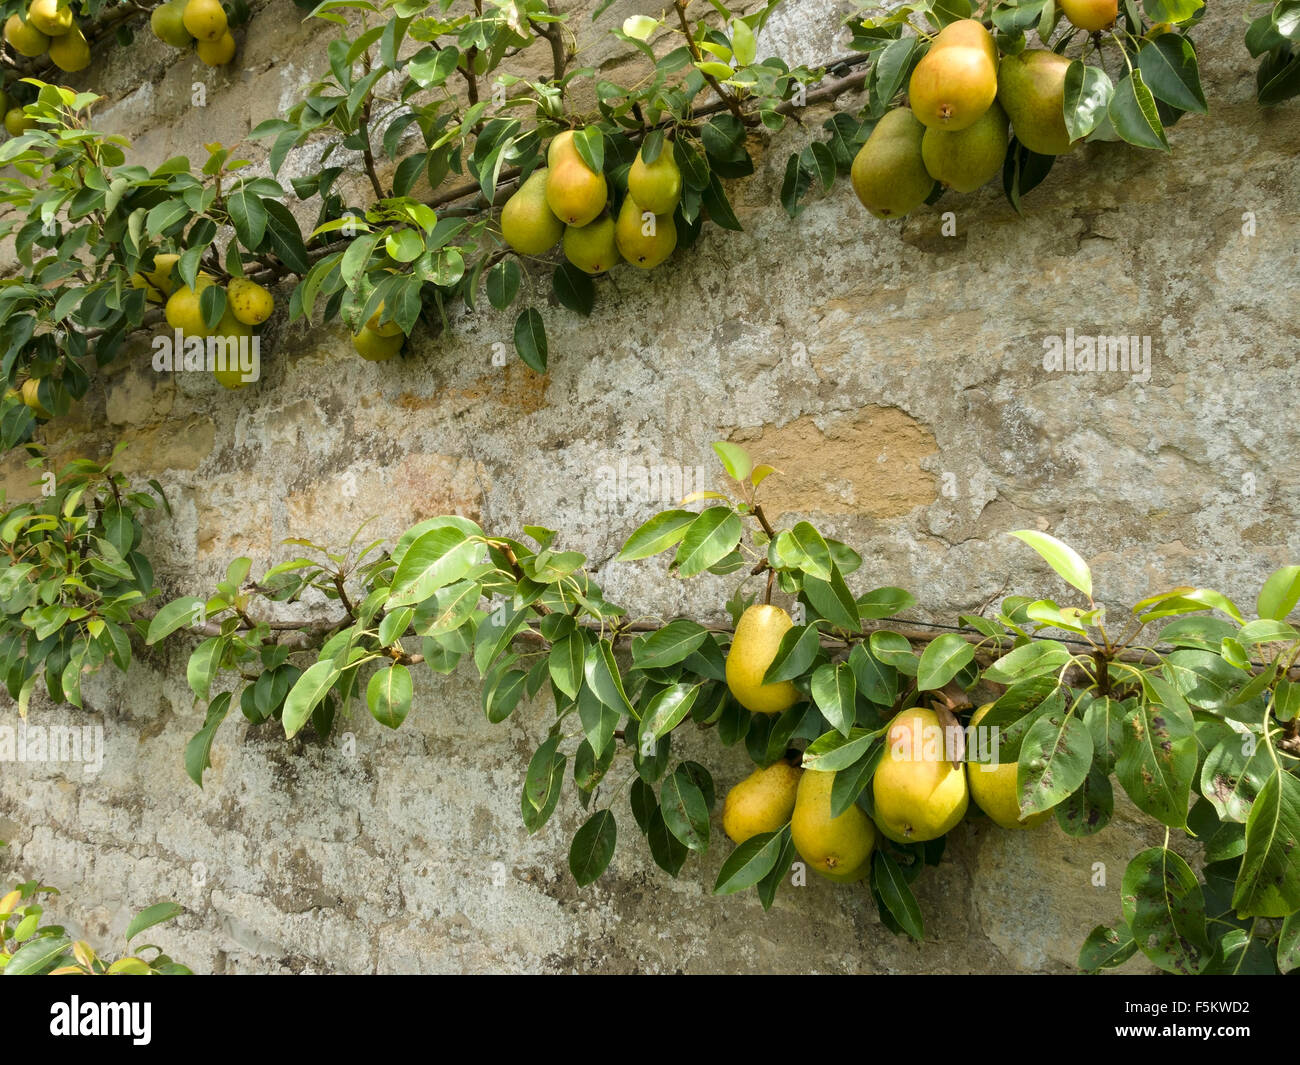 Espalier trained pear tree with pears against old stone wall, Grantham, England, UK. Stock Photo